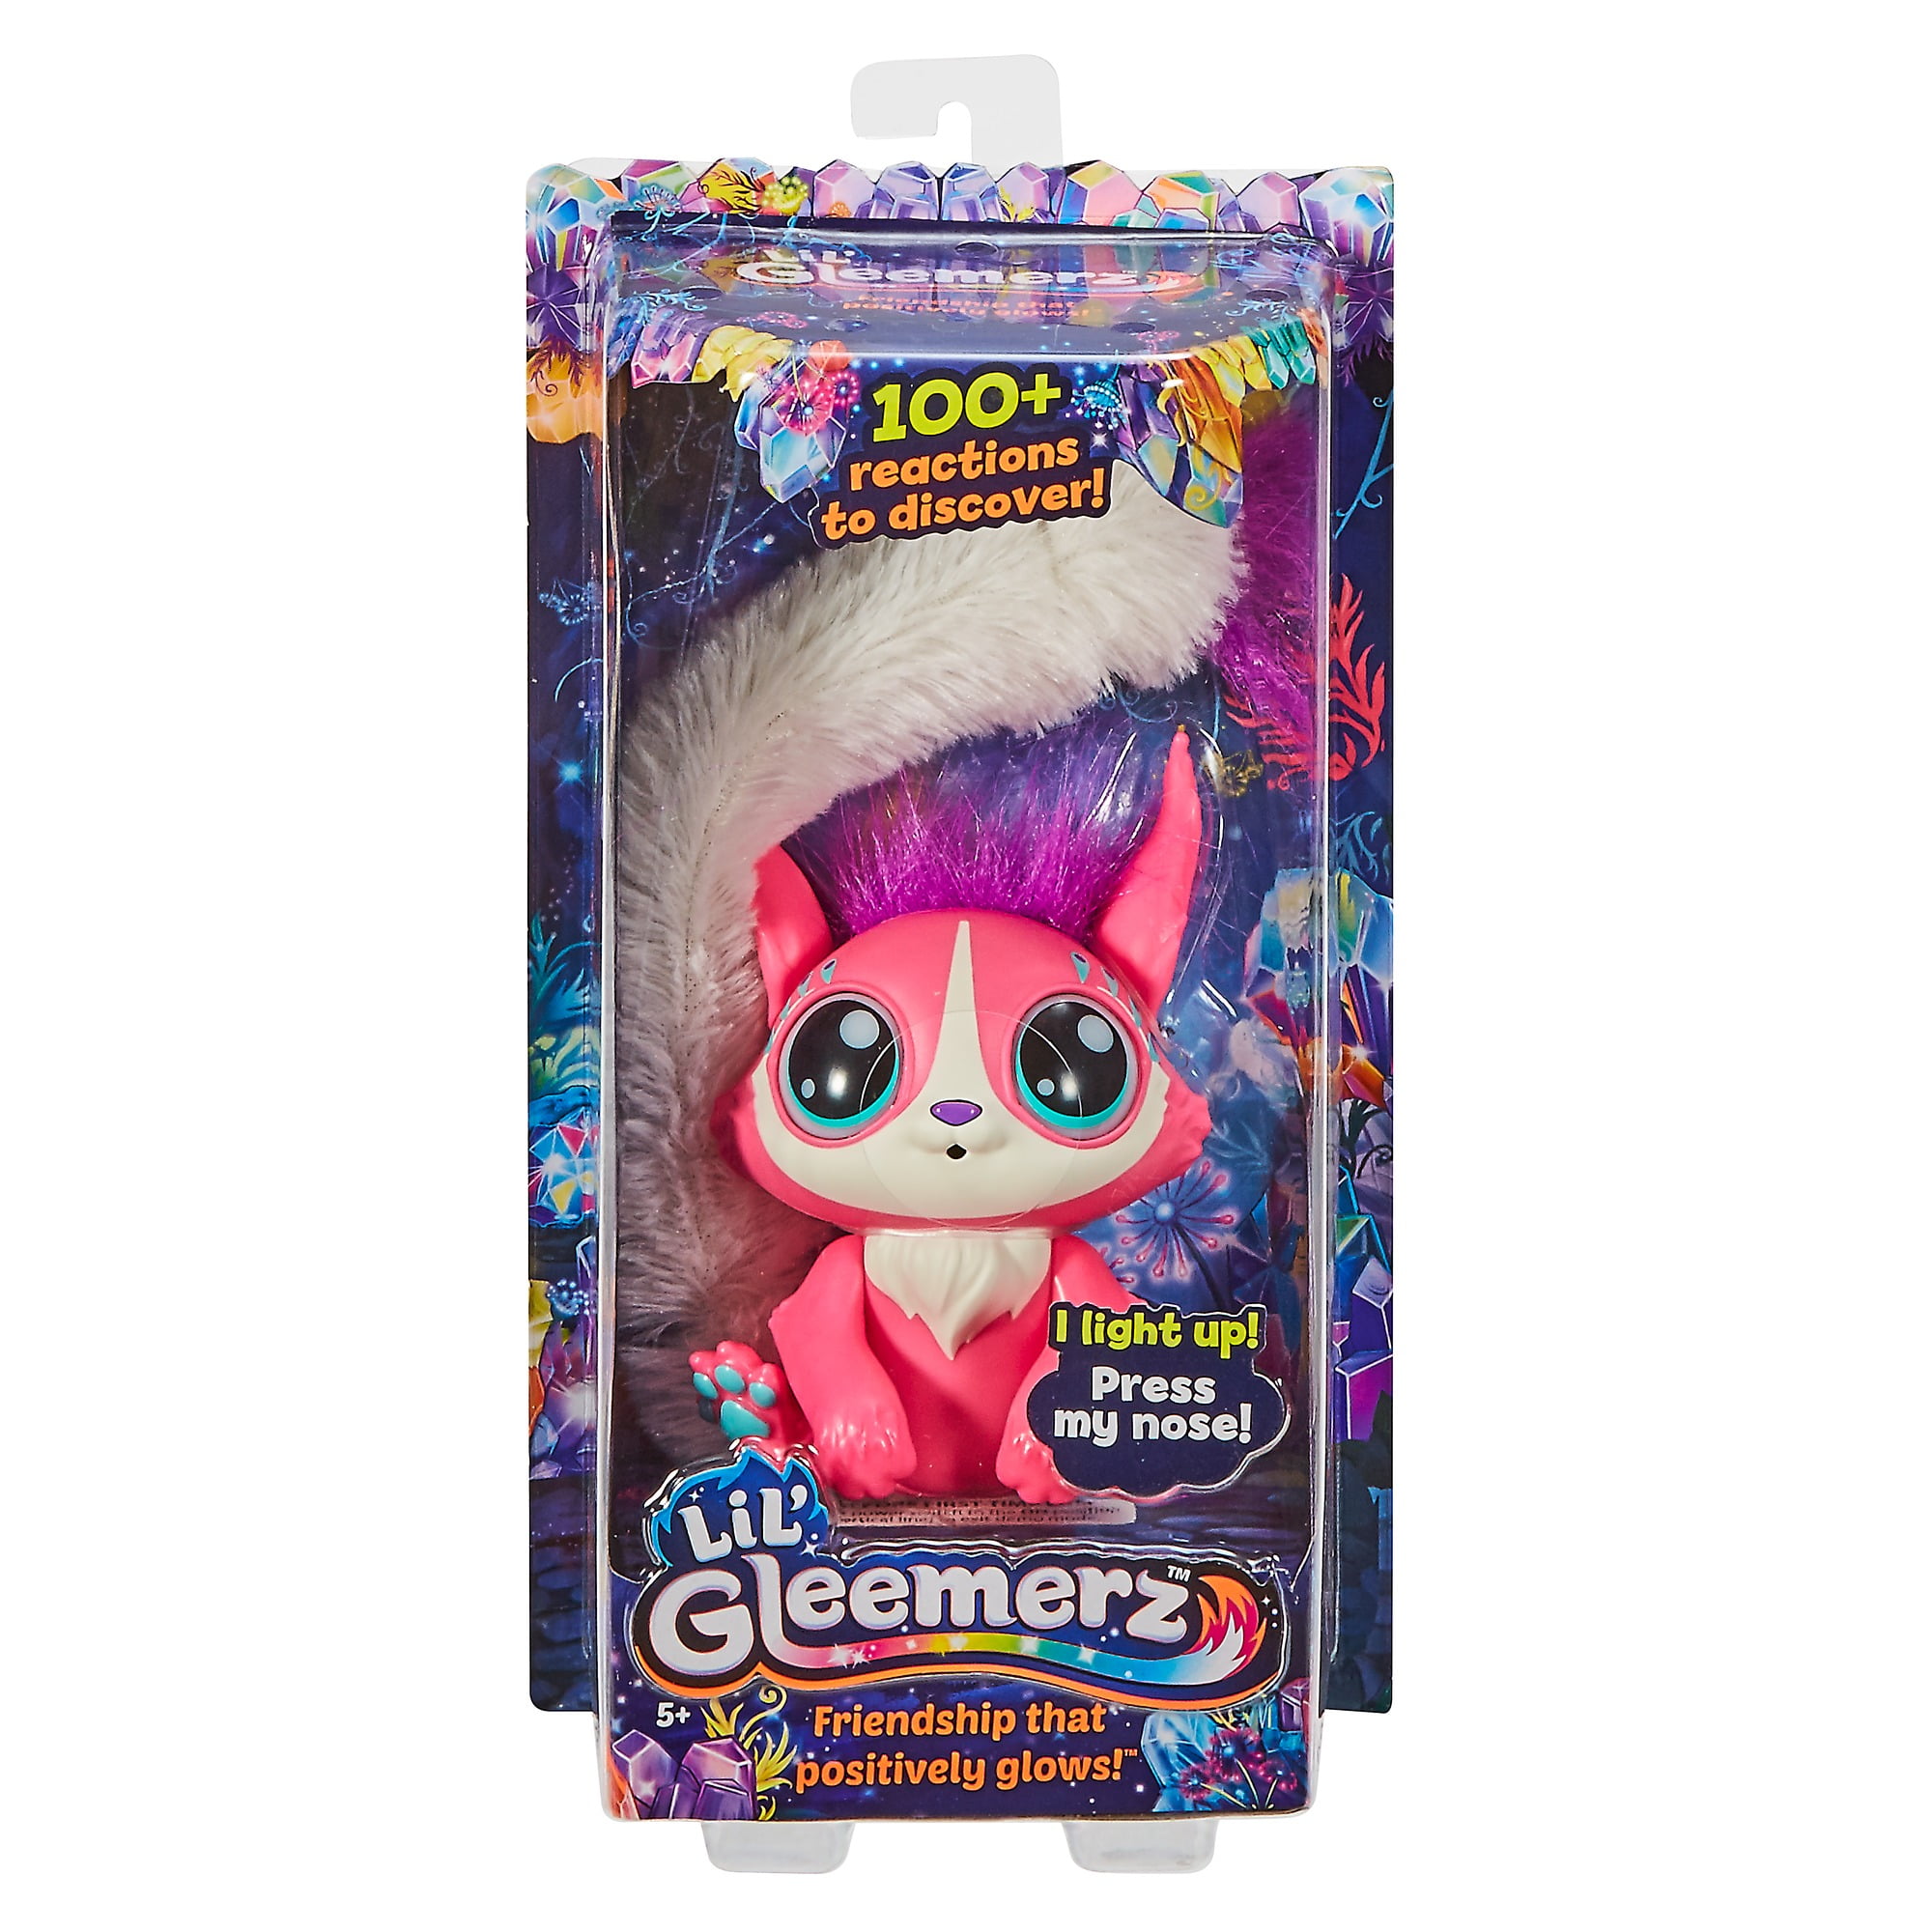 Jonathan. glimmers toy. 